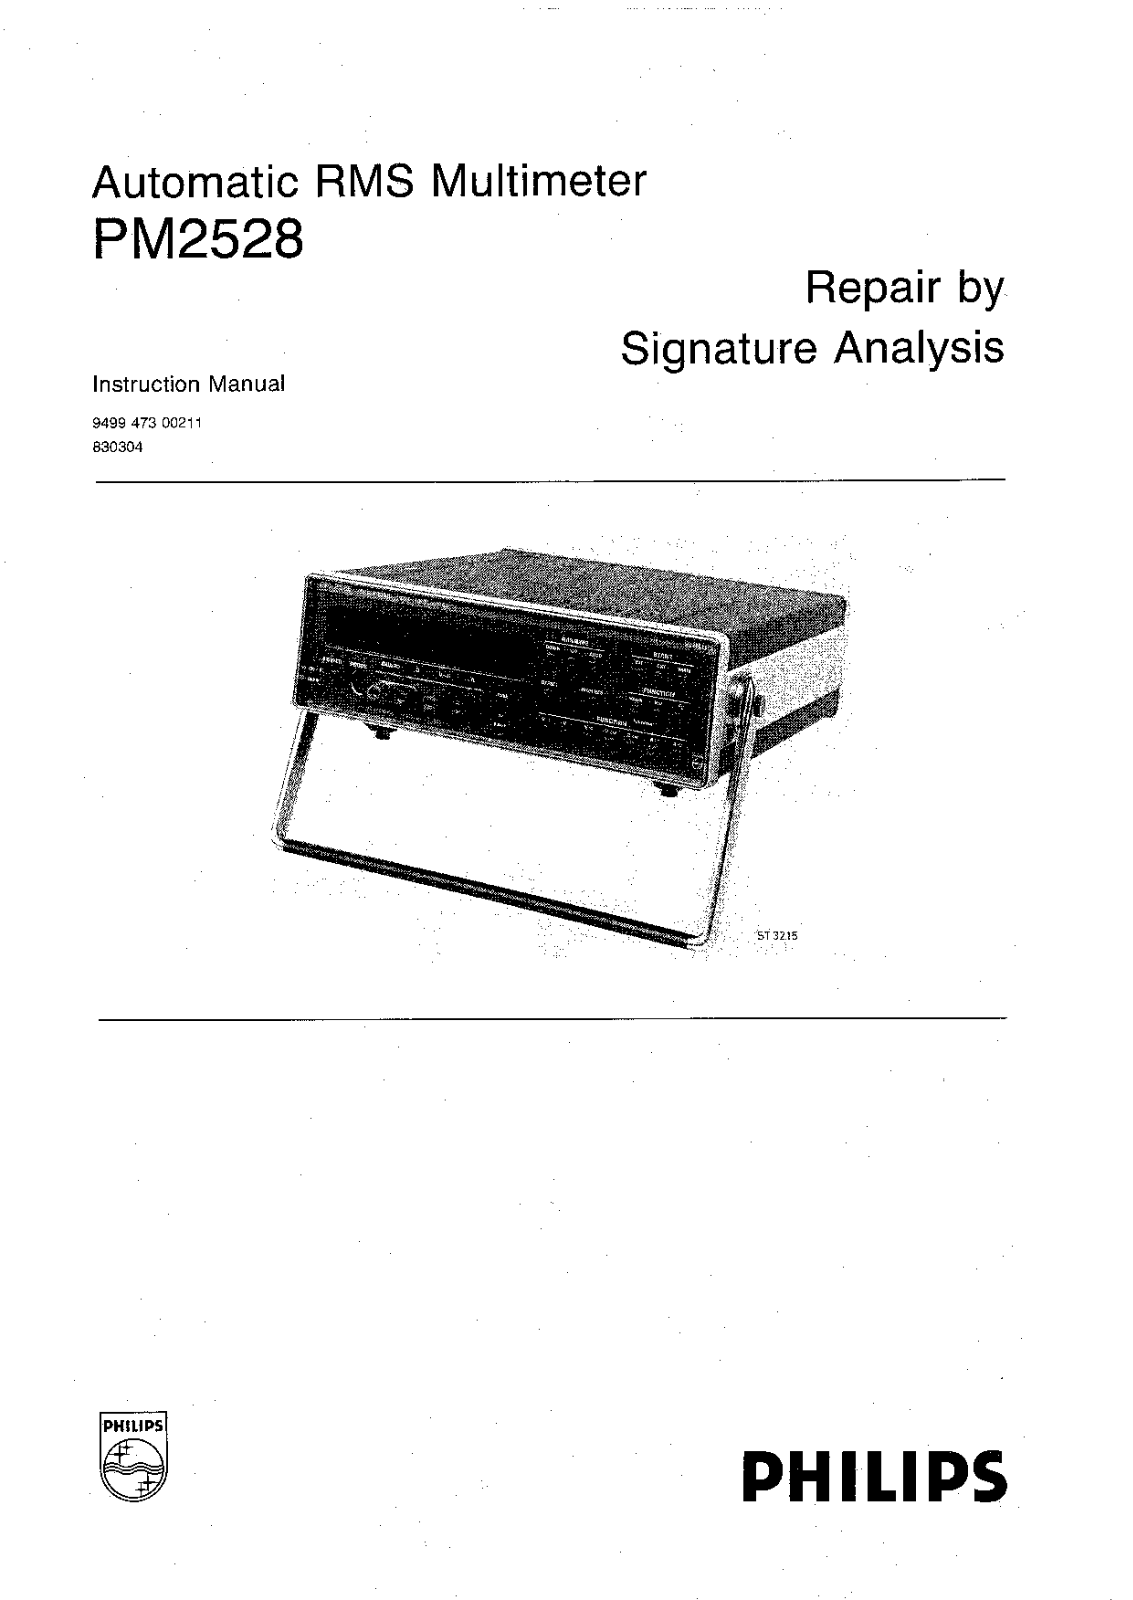 Philips PM-2528 Service Manual